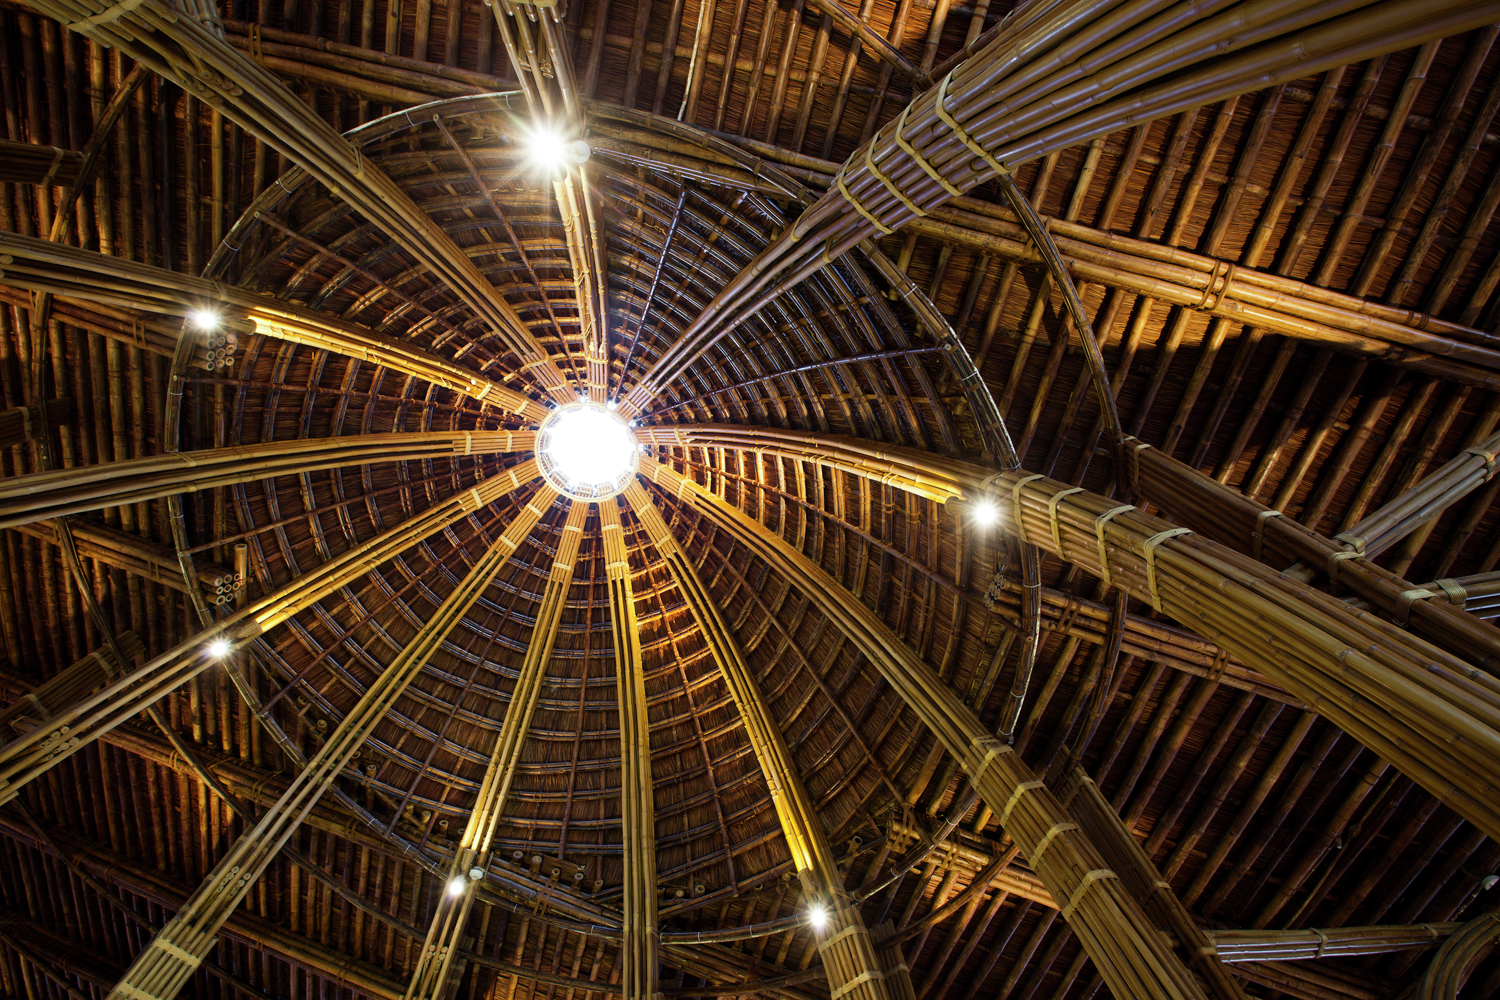 09_view-up-bamboo-dome